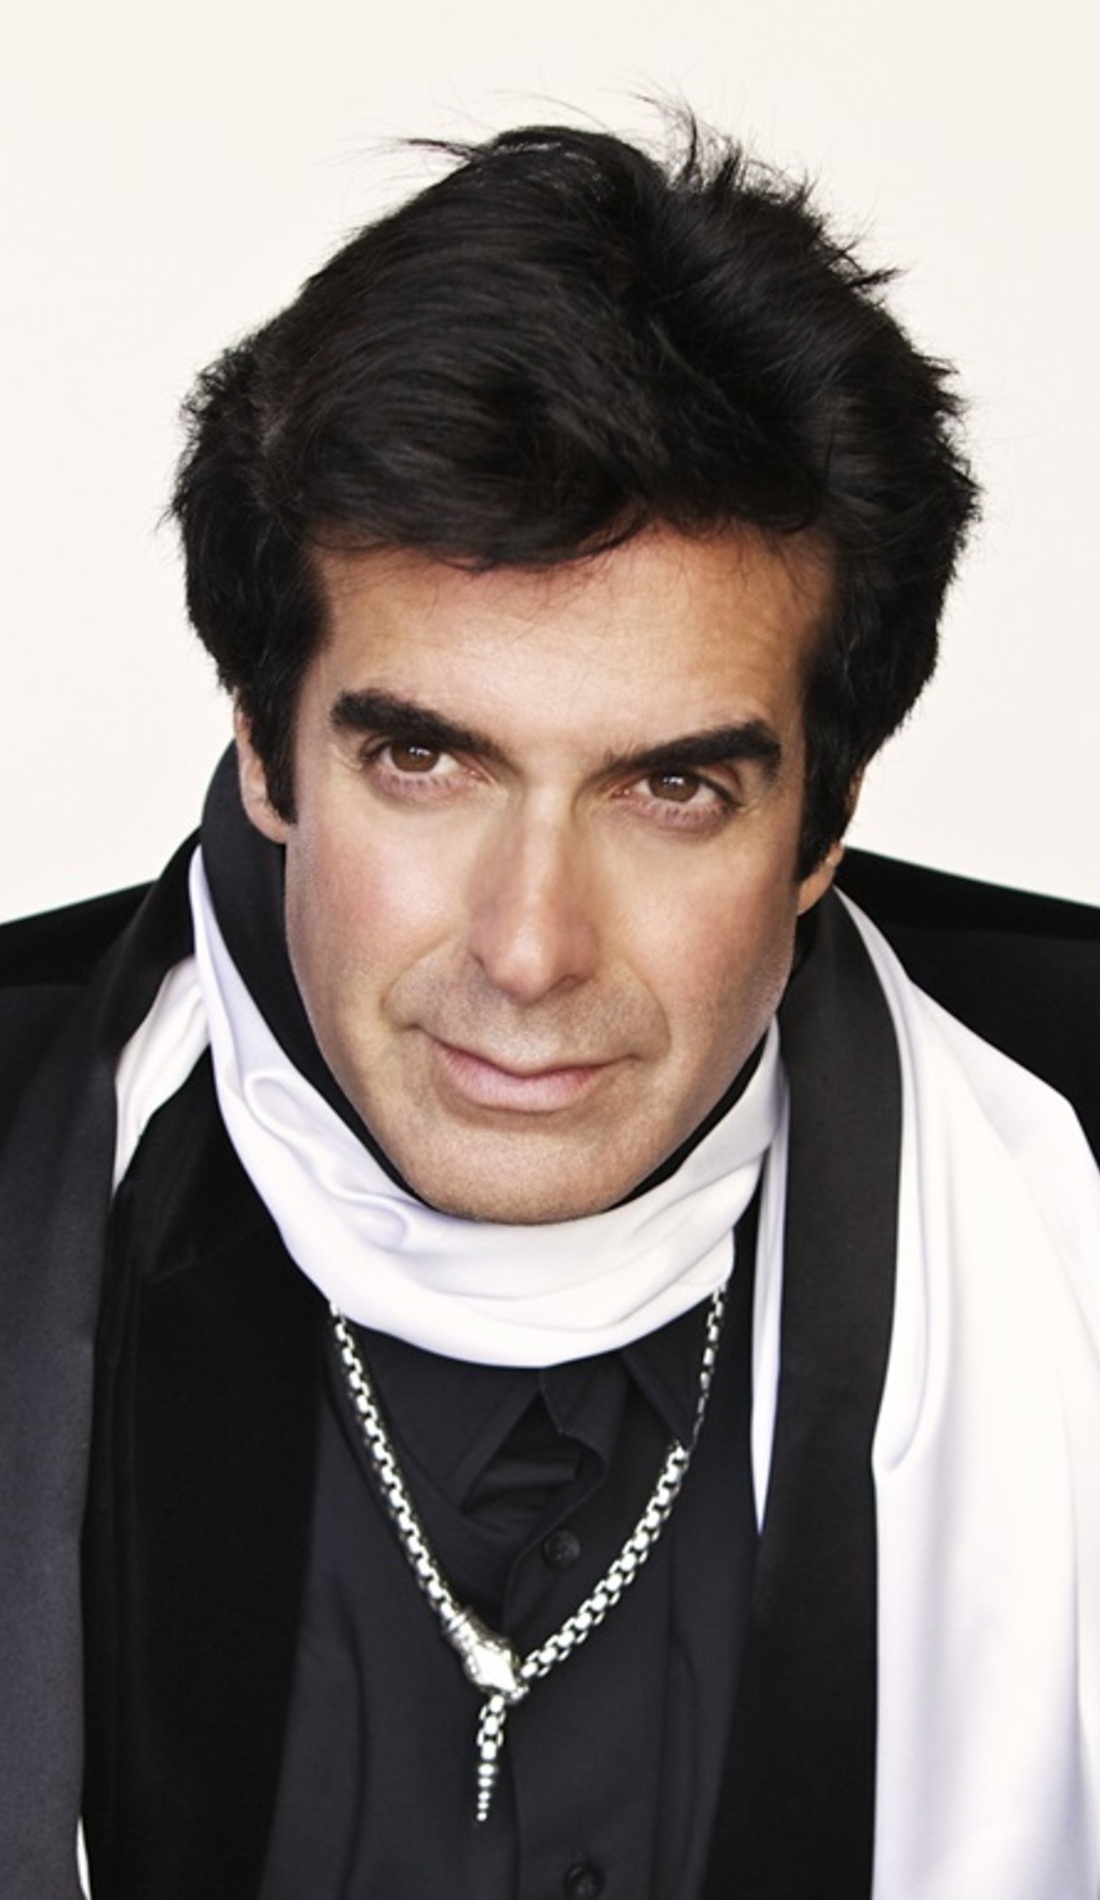 A David Copperfield live event